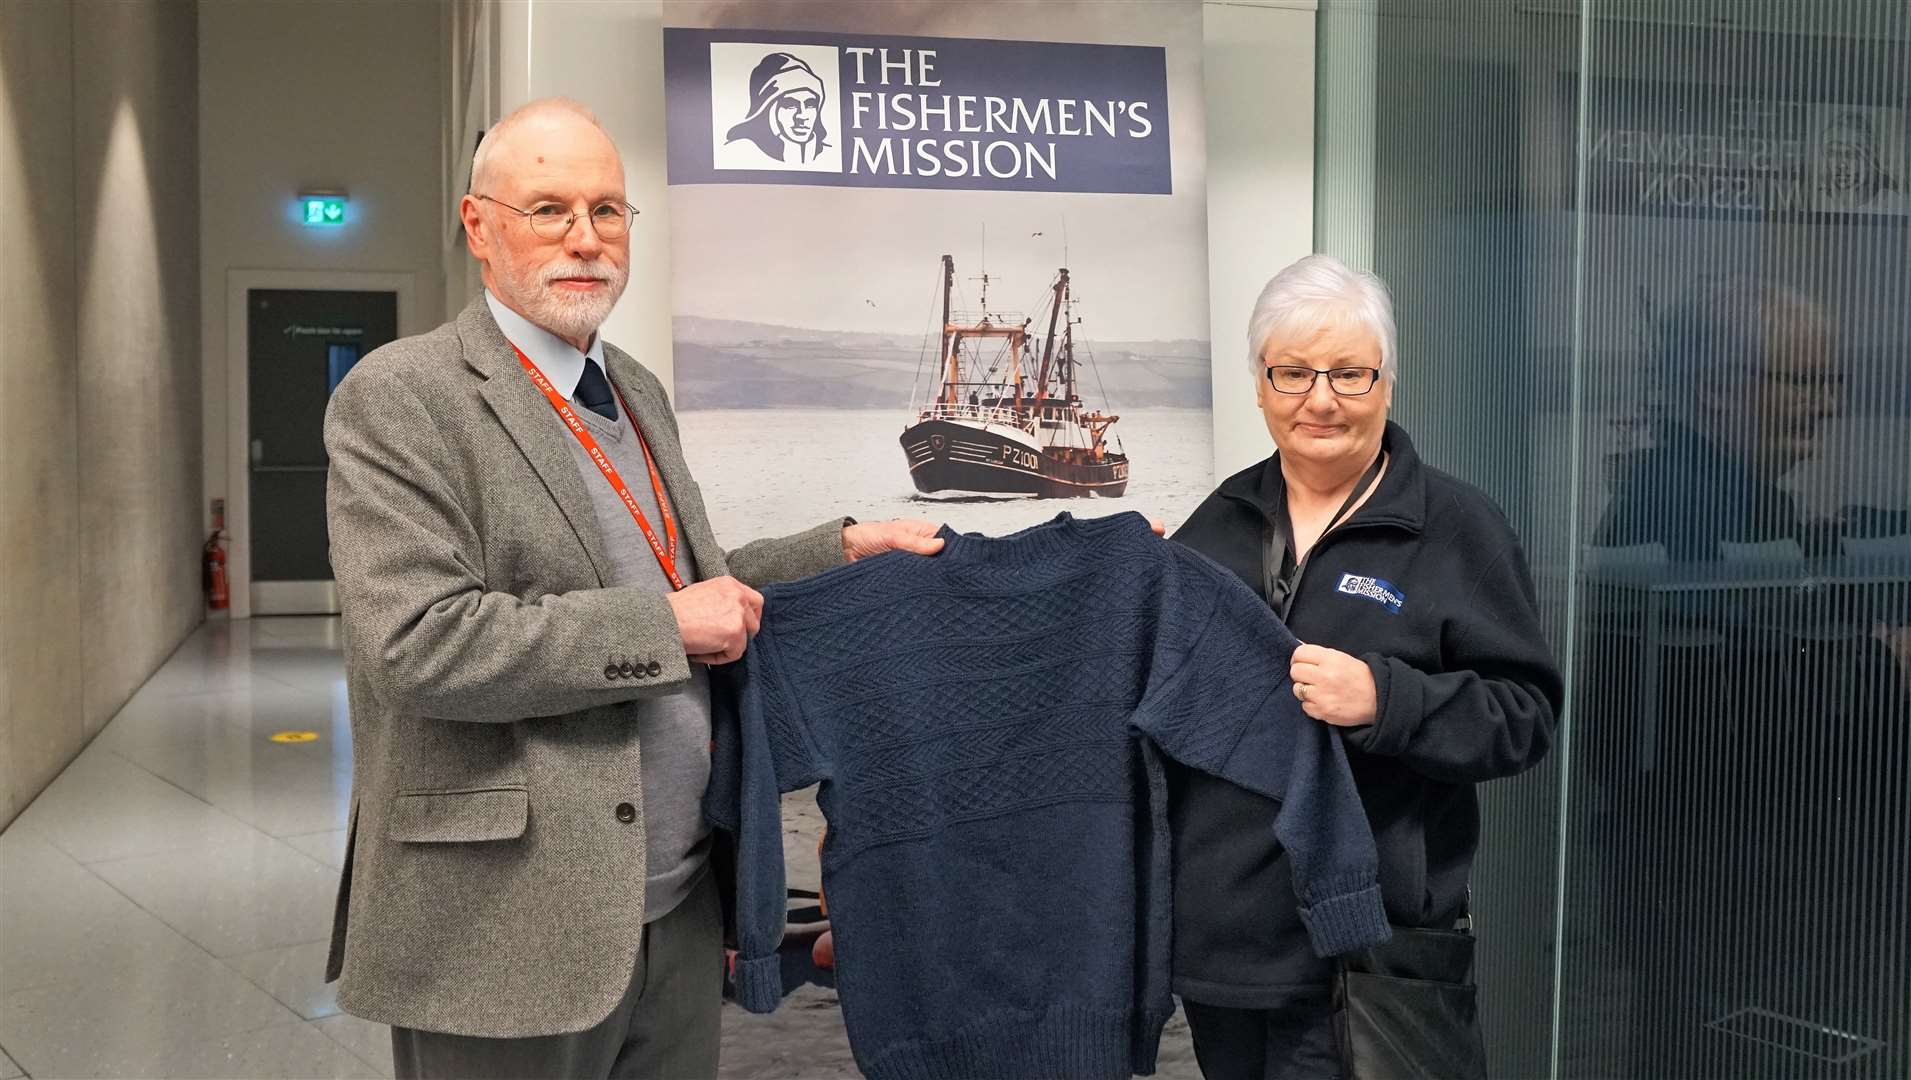 The gansey was knitted by Gordon Reid who is pictured at Nucleus archive centre in Wick where he works. Alongside him is Jackie Dodds from the Fishermen's Mission. Picture: DGS